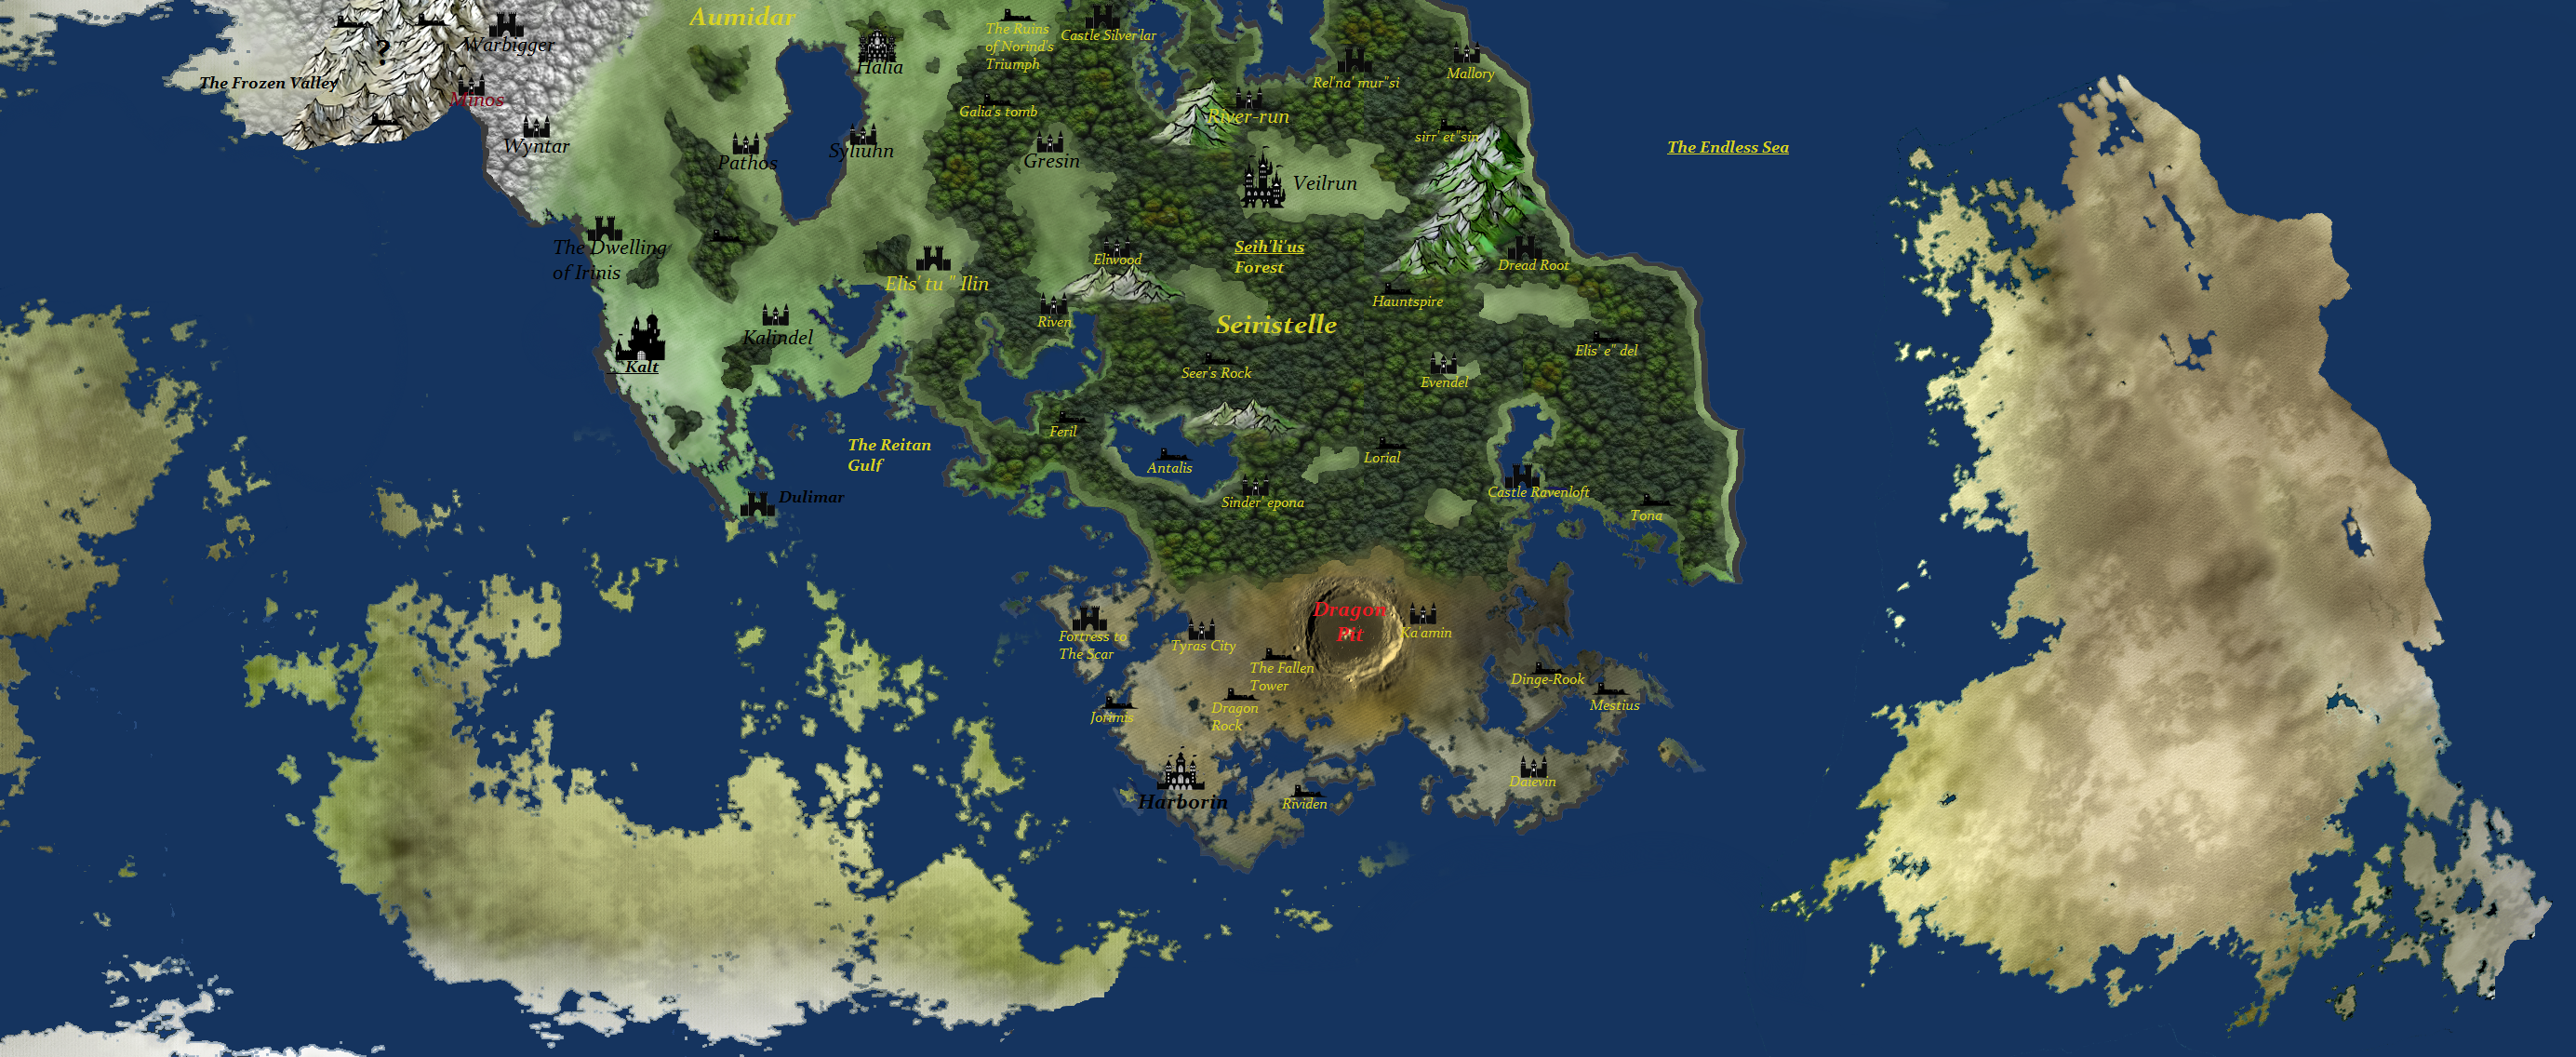 city_of_guilds_storyline_map_by_angelmarieturan-d8pm3qx.png